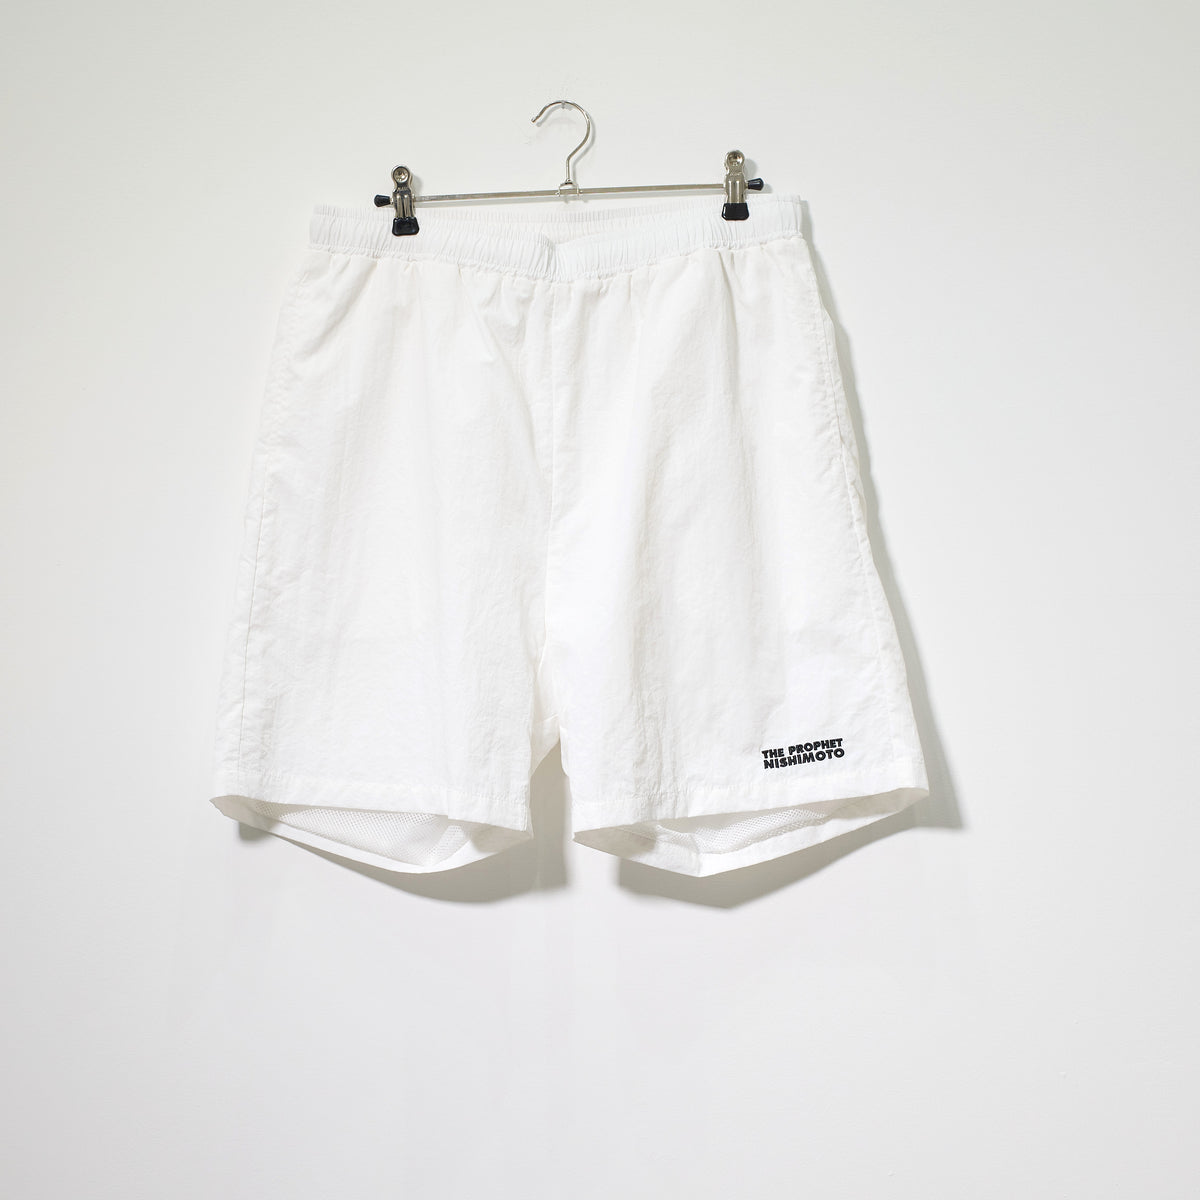 NISHIMOTO IS THE MOUTH TRACK SHORTS ストア - パンツ